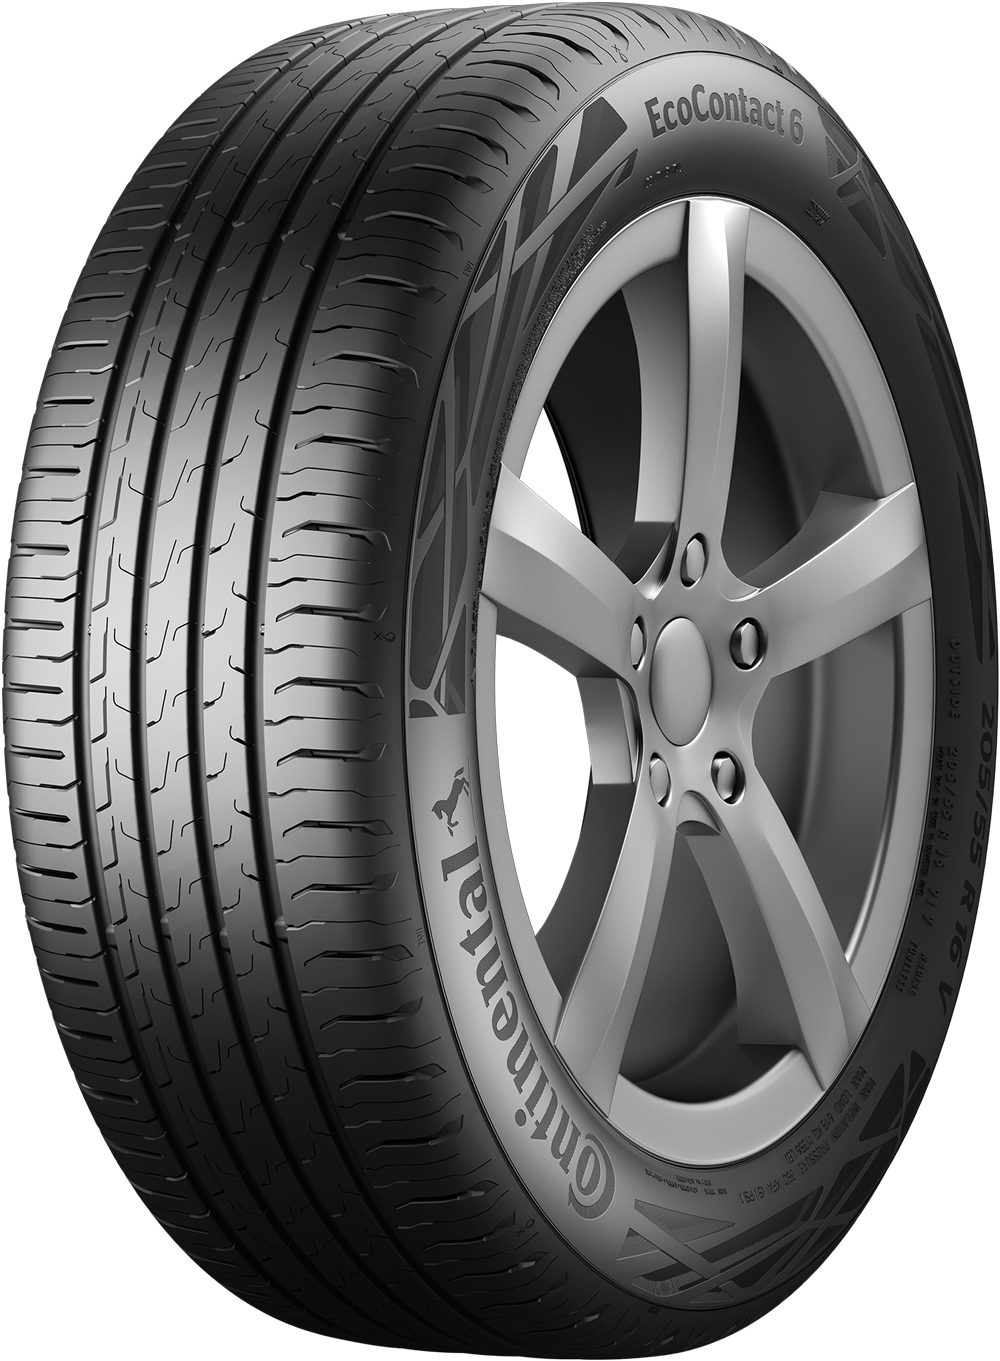 Anvelope auto CONTINENTAL ECO6XL XL 185/55 R15 86V